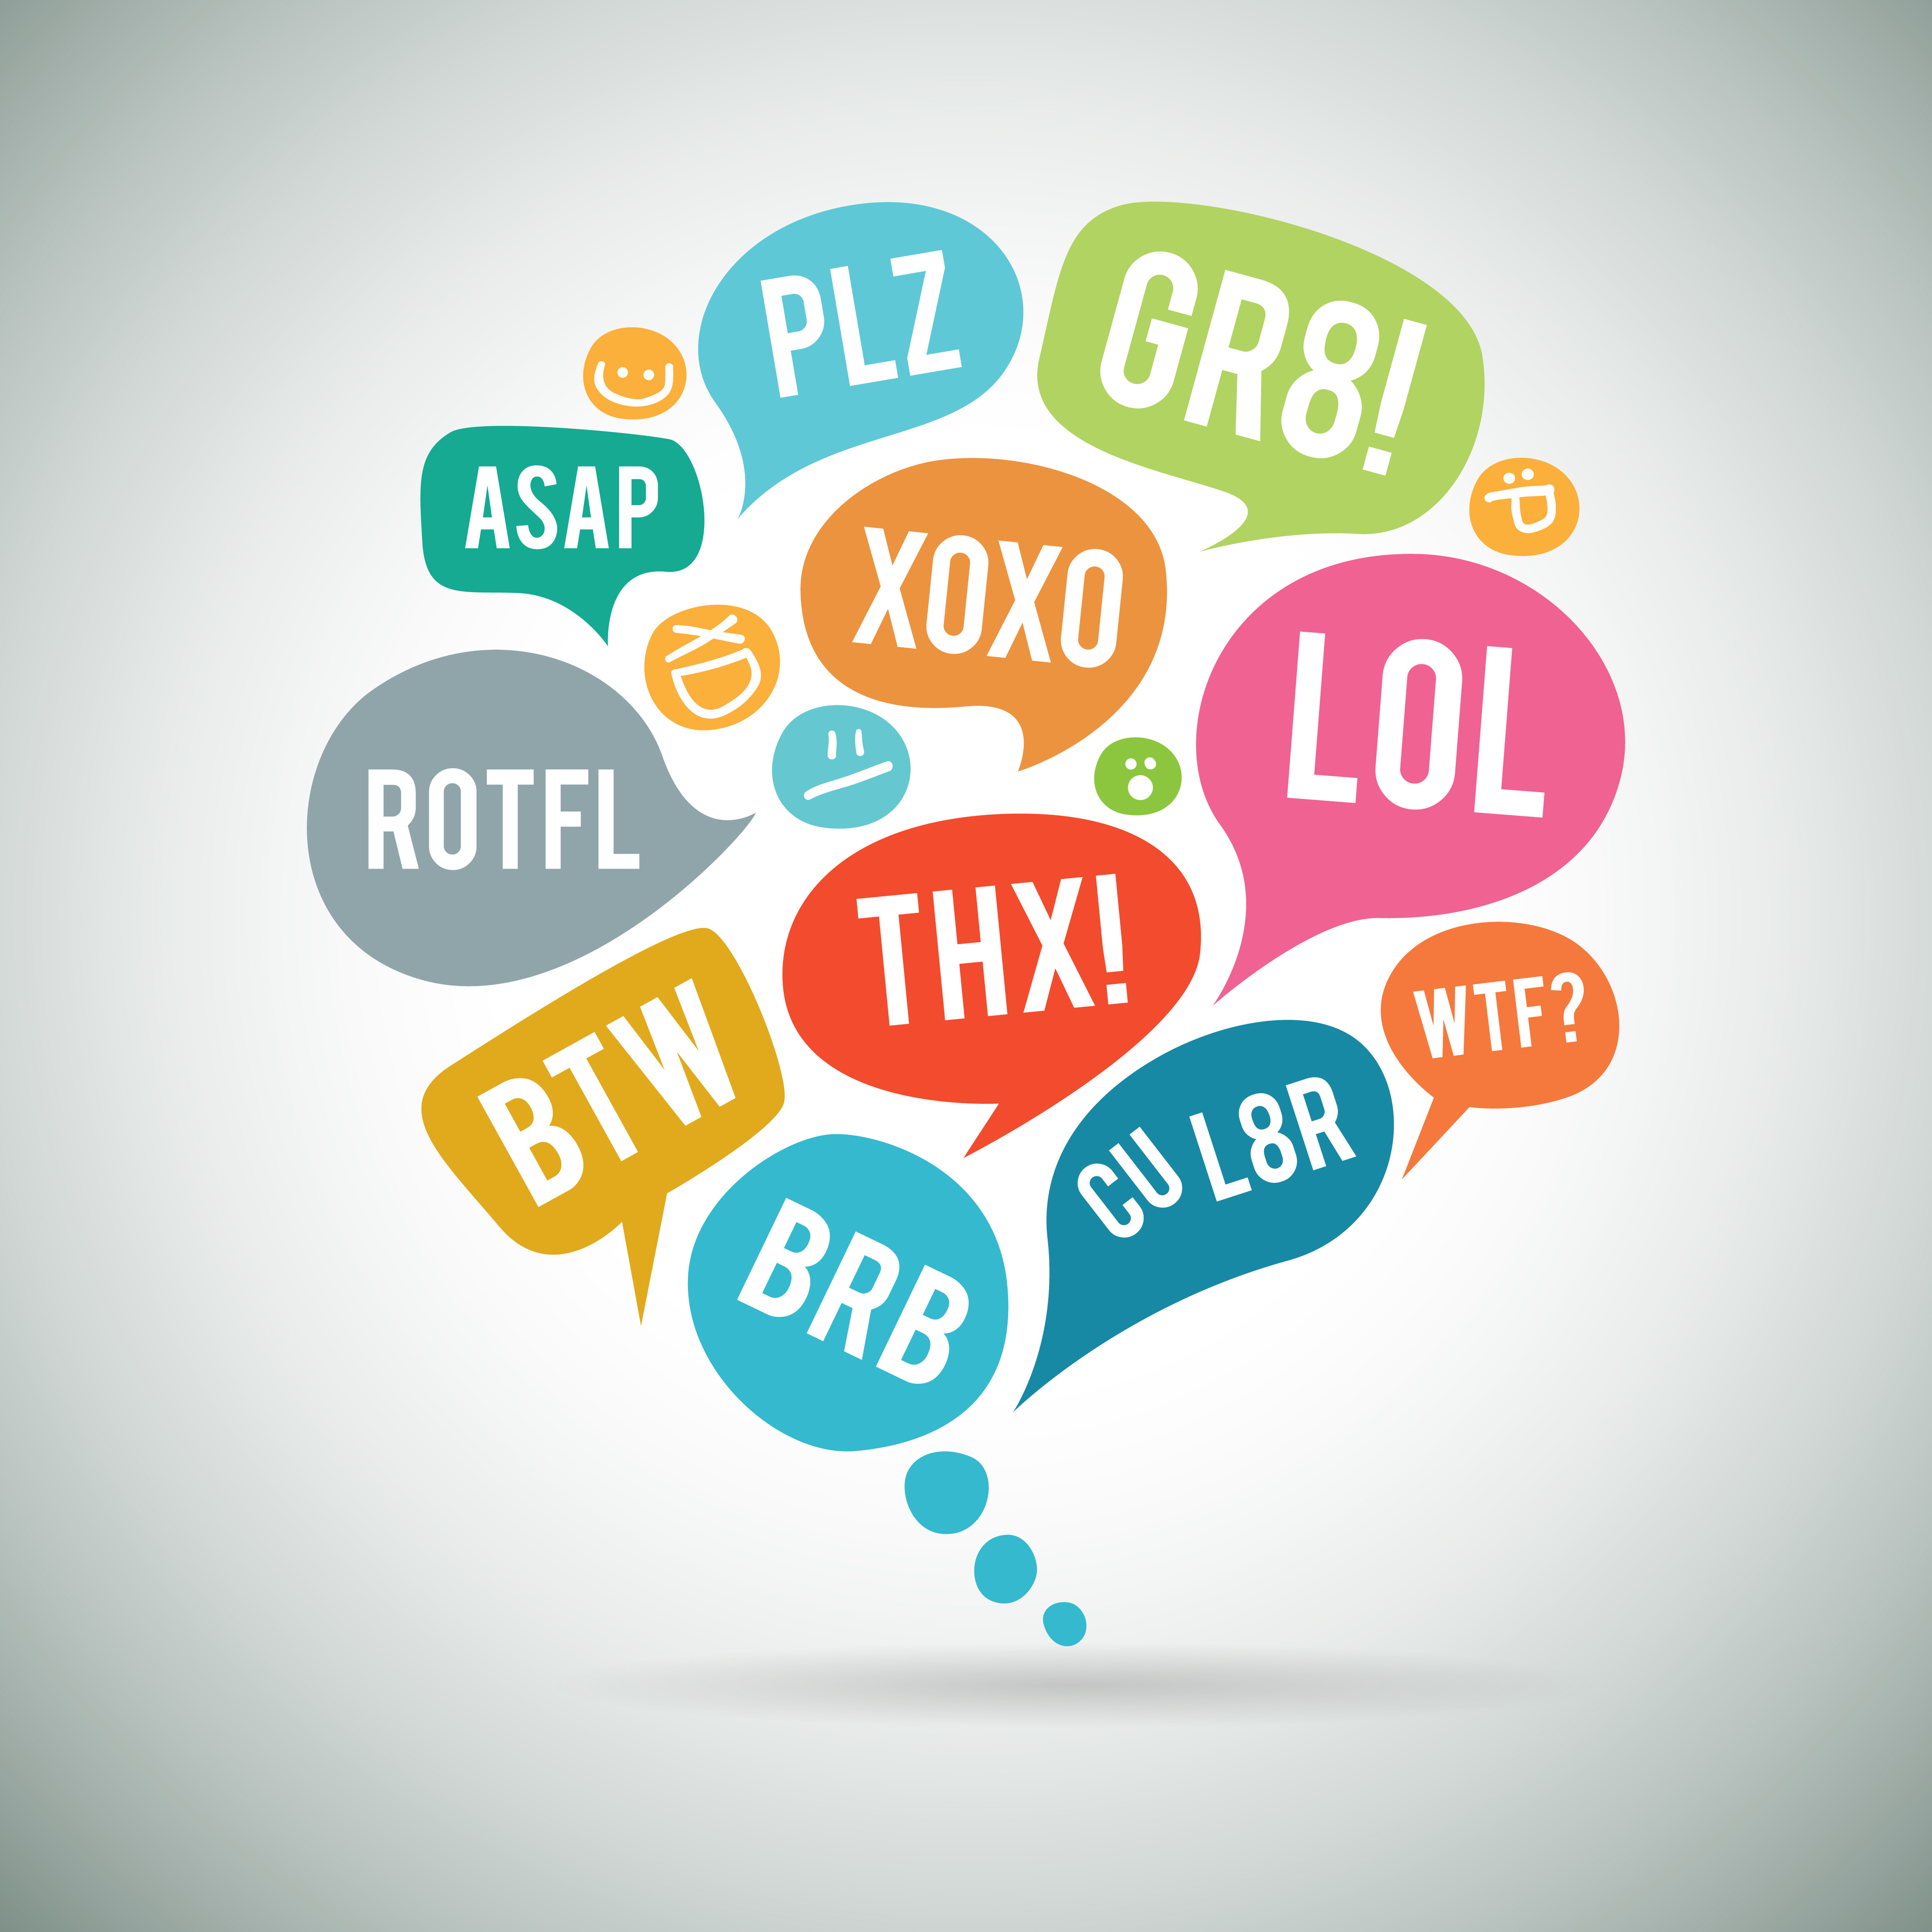 40+ text abbreviations to use in business